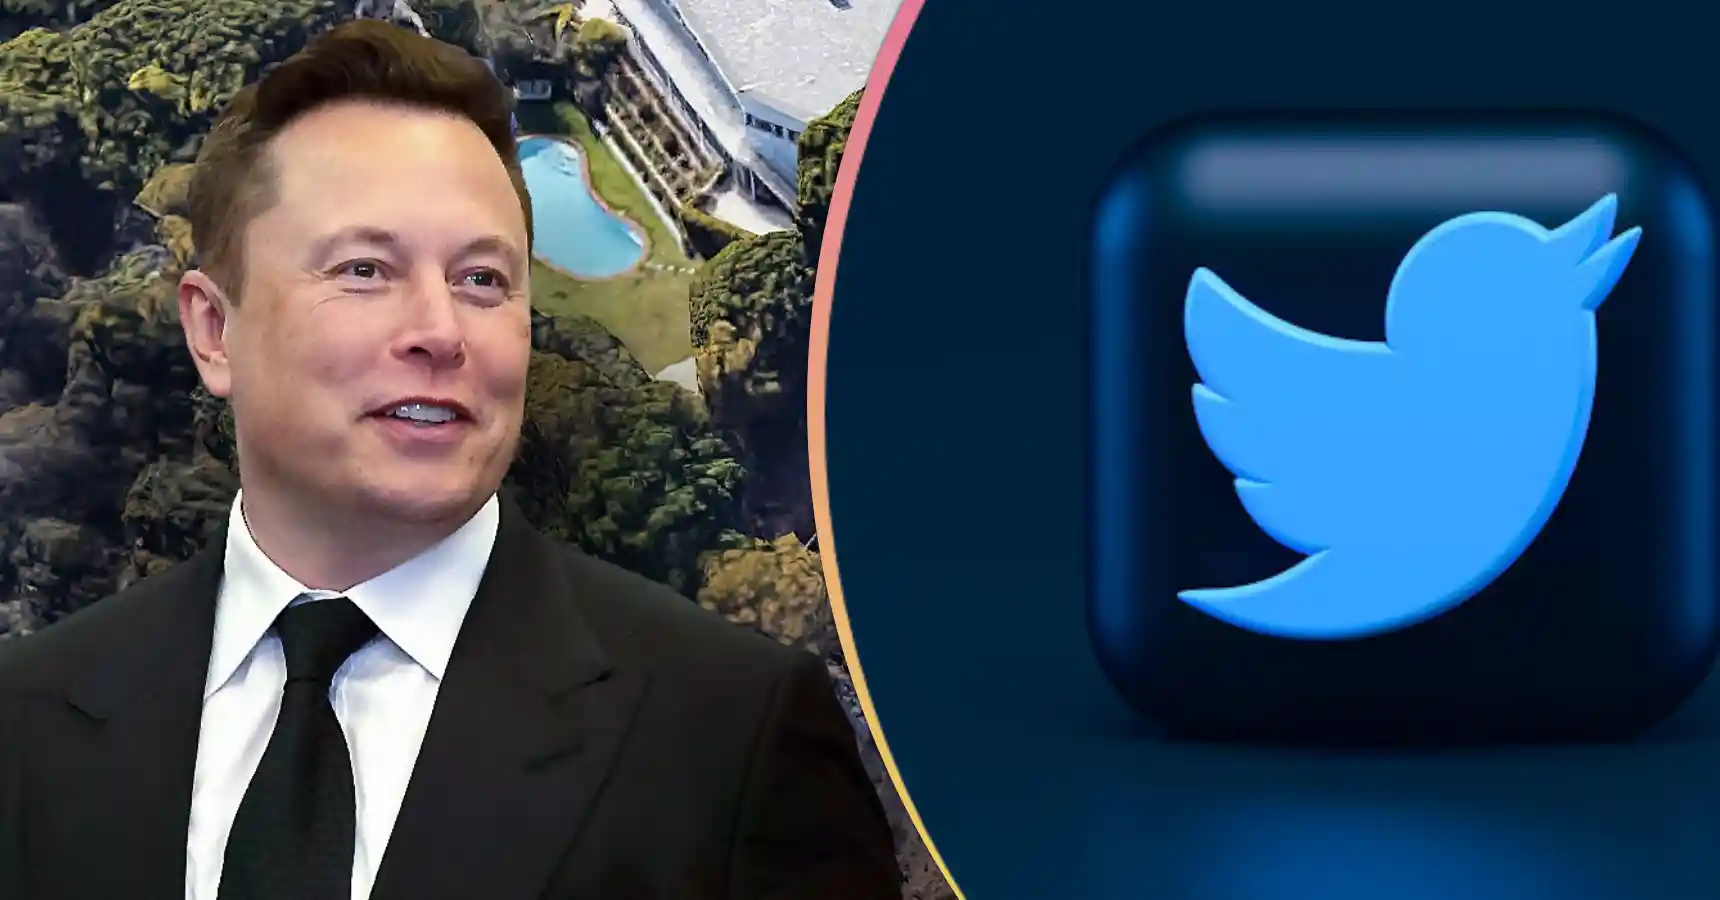 elon musk himself has given this message to everyone about the logo of twitter